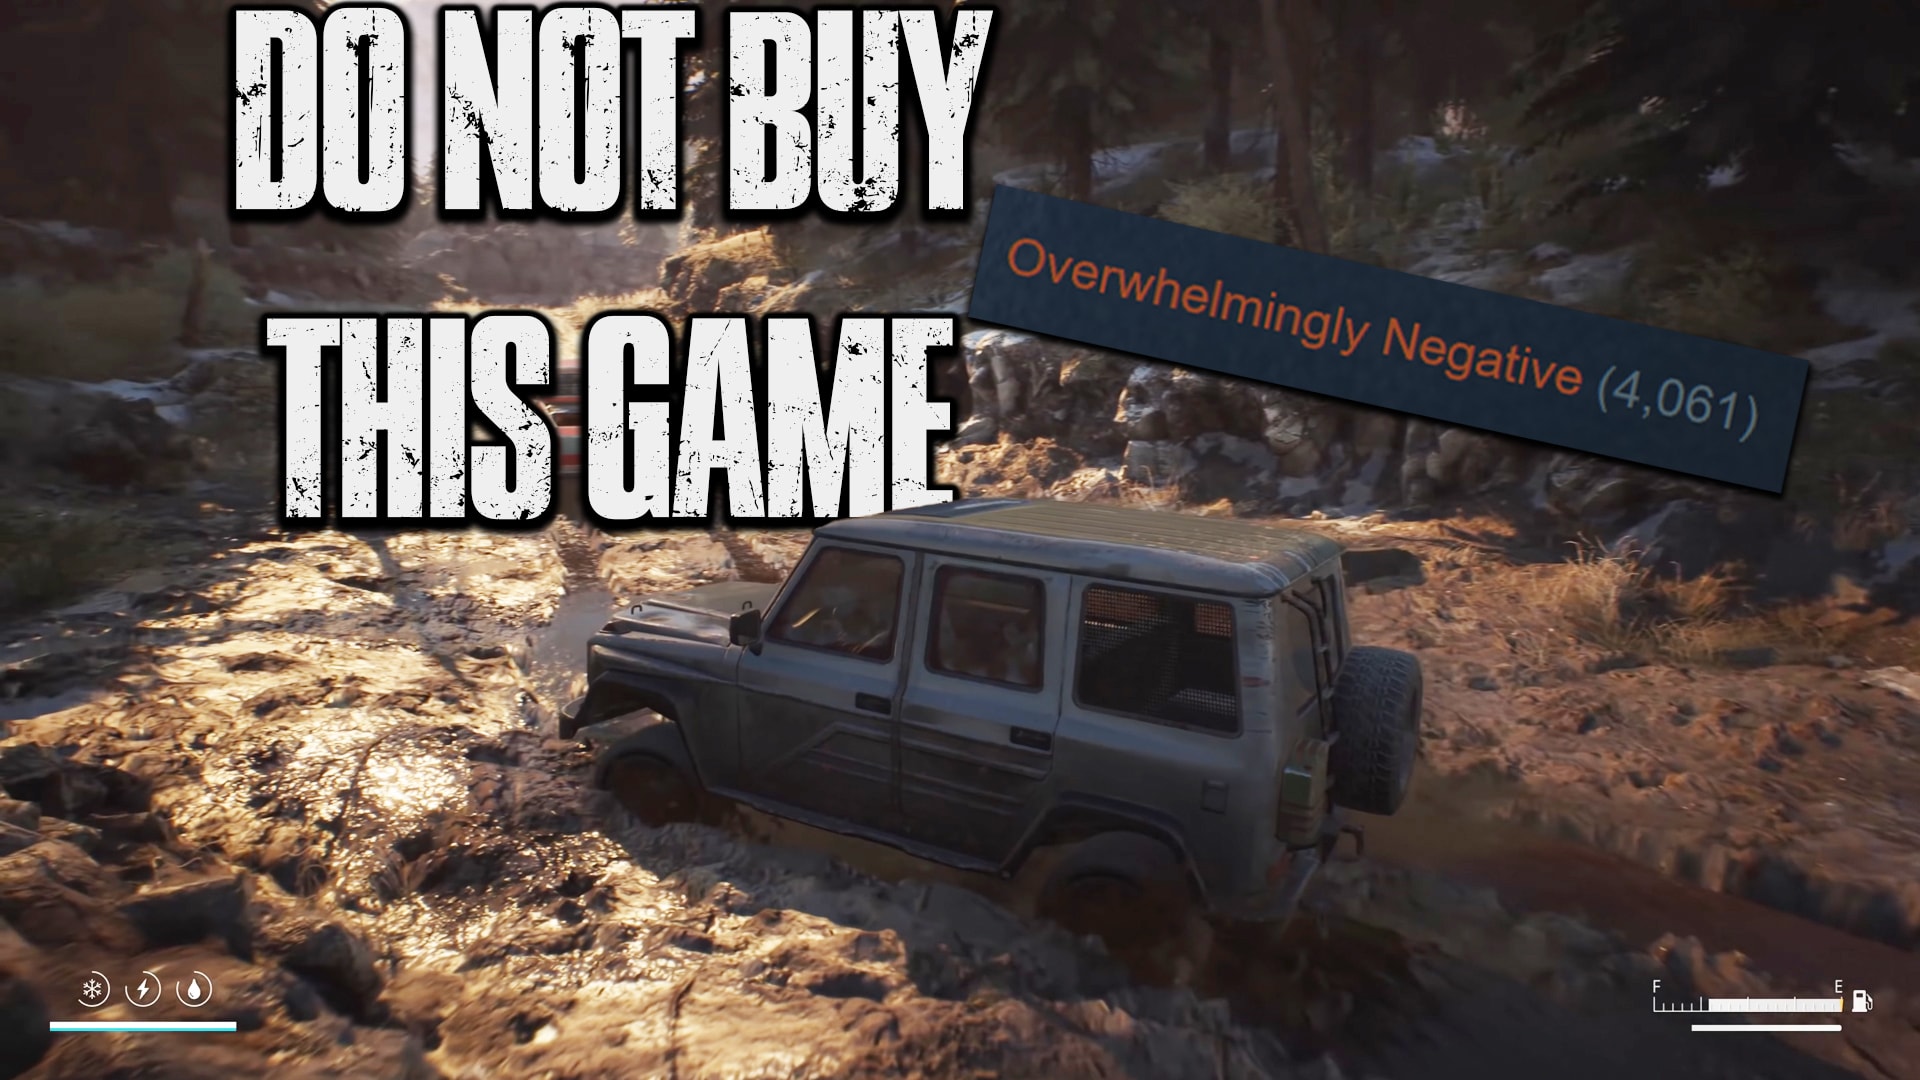 The Day Before launches to 'overwhelmingly negative' Steam reviews